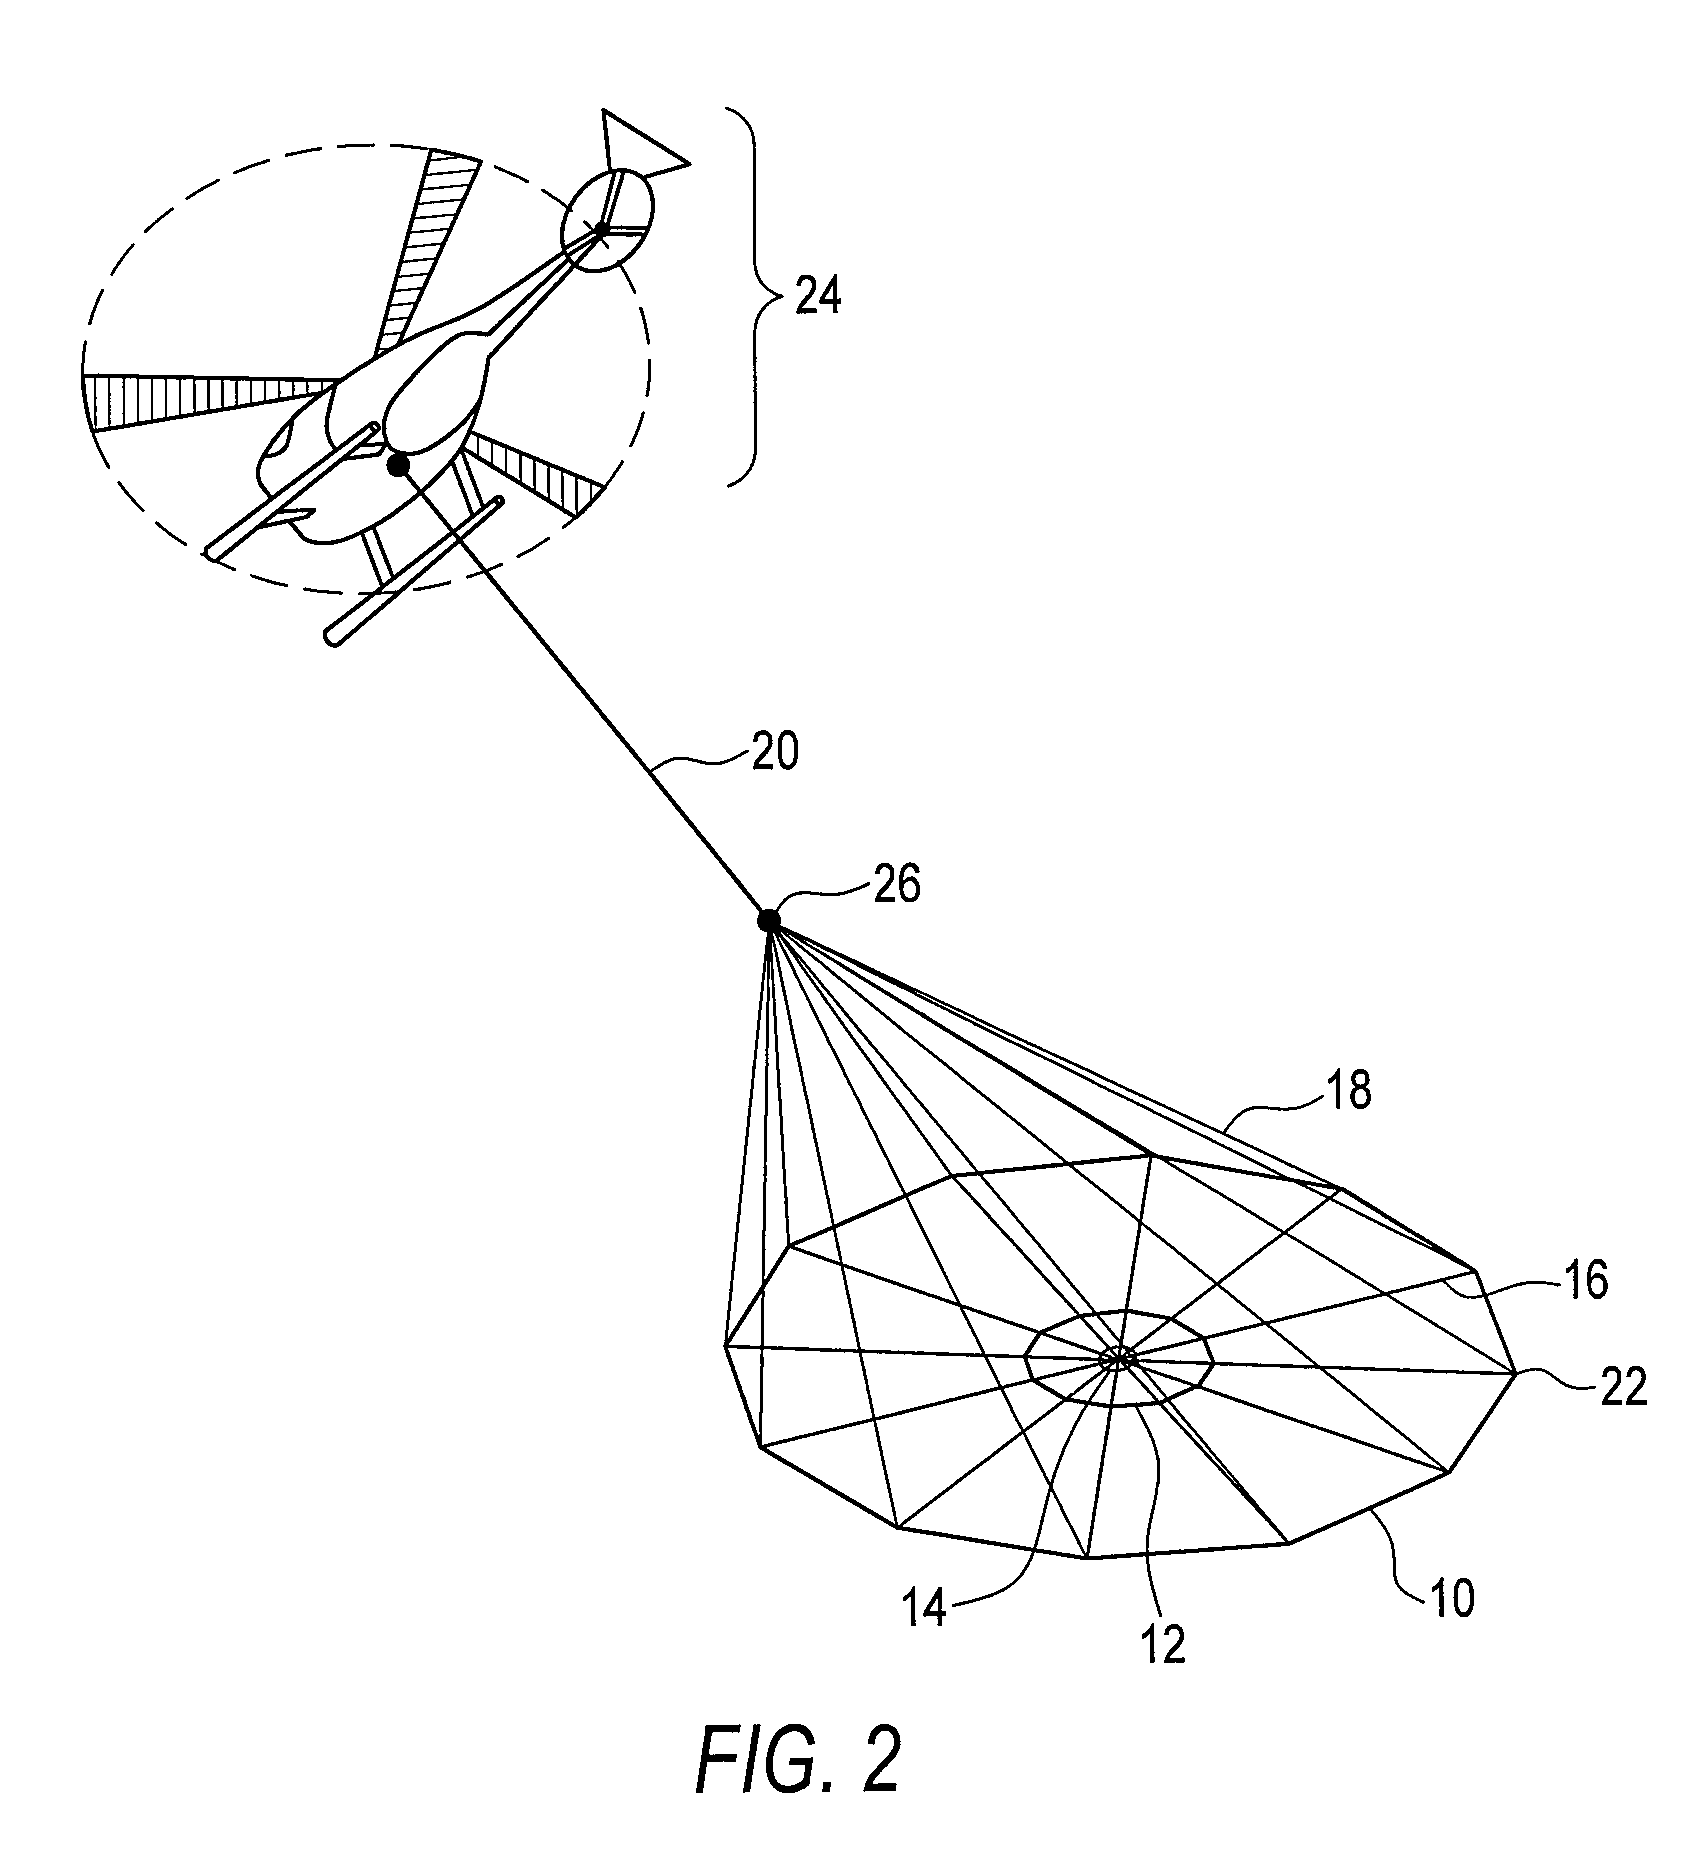 Bucking coil and B-field measurement system and apparatus for time domain electromagnetic measurements